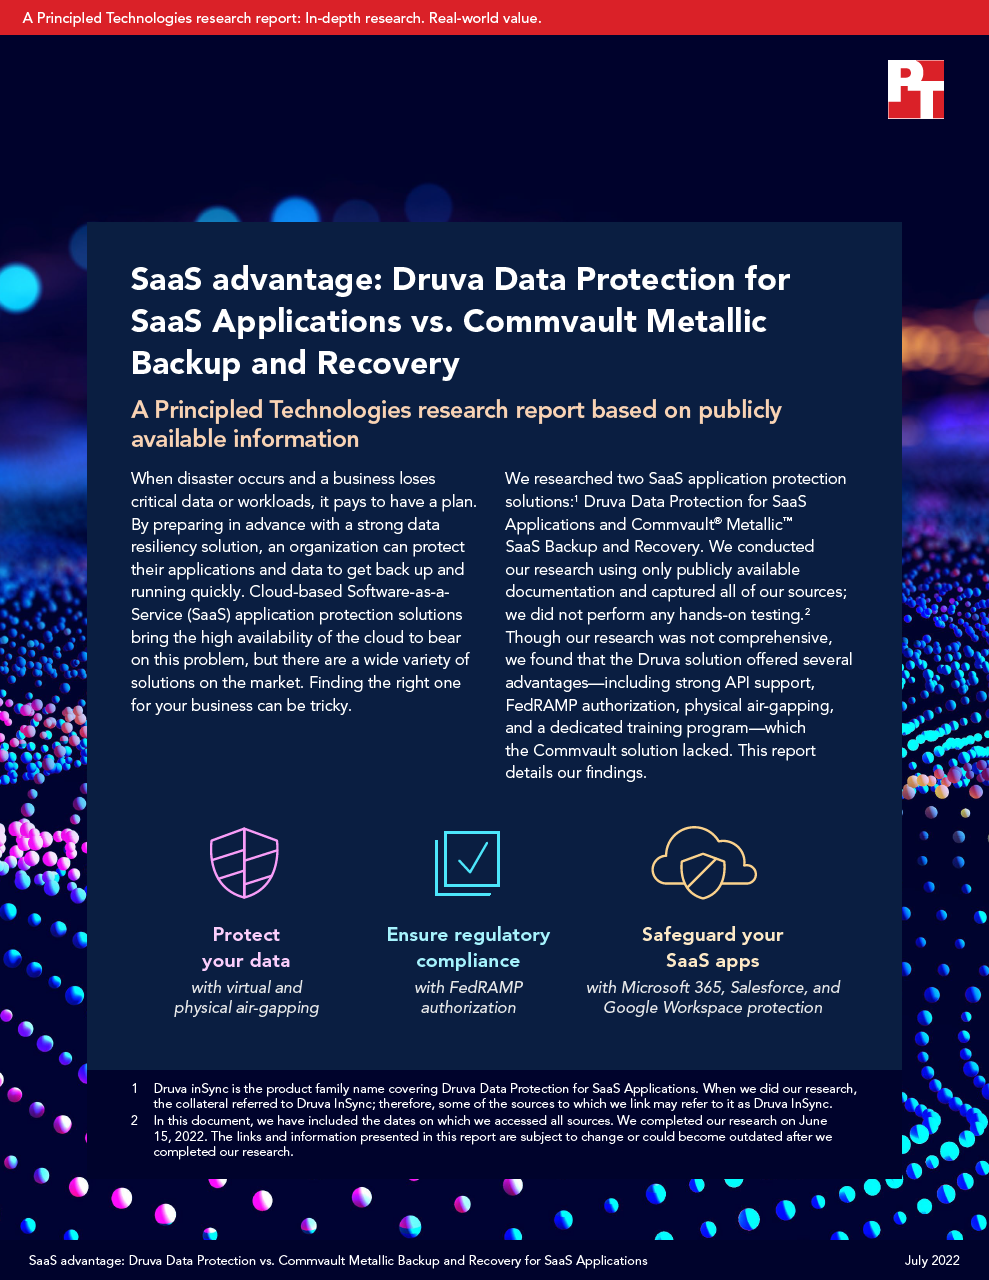 SaaS advantage: Druva Data Protection for SaaS Applications vs. Commvault Metallic Backup and Recovery